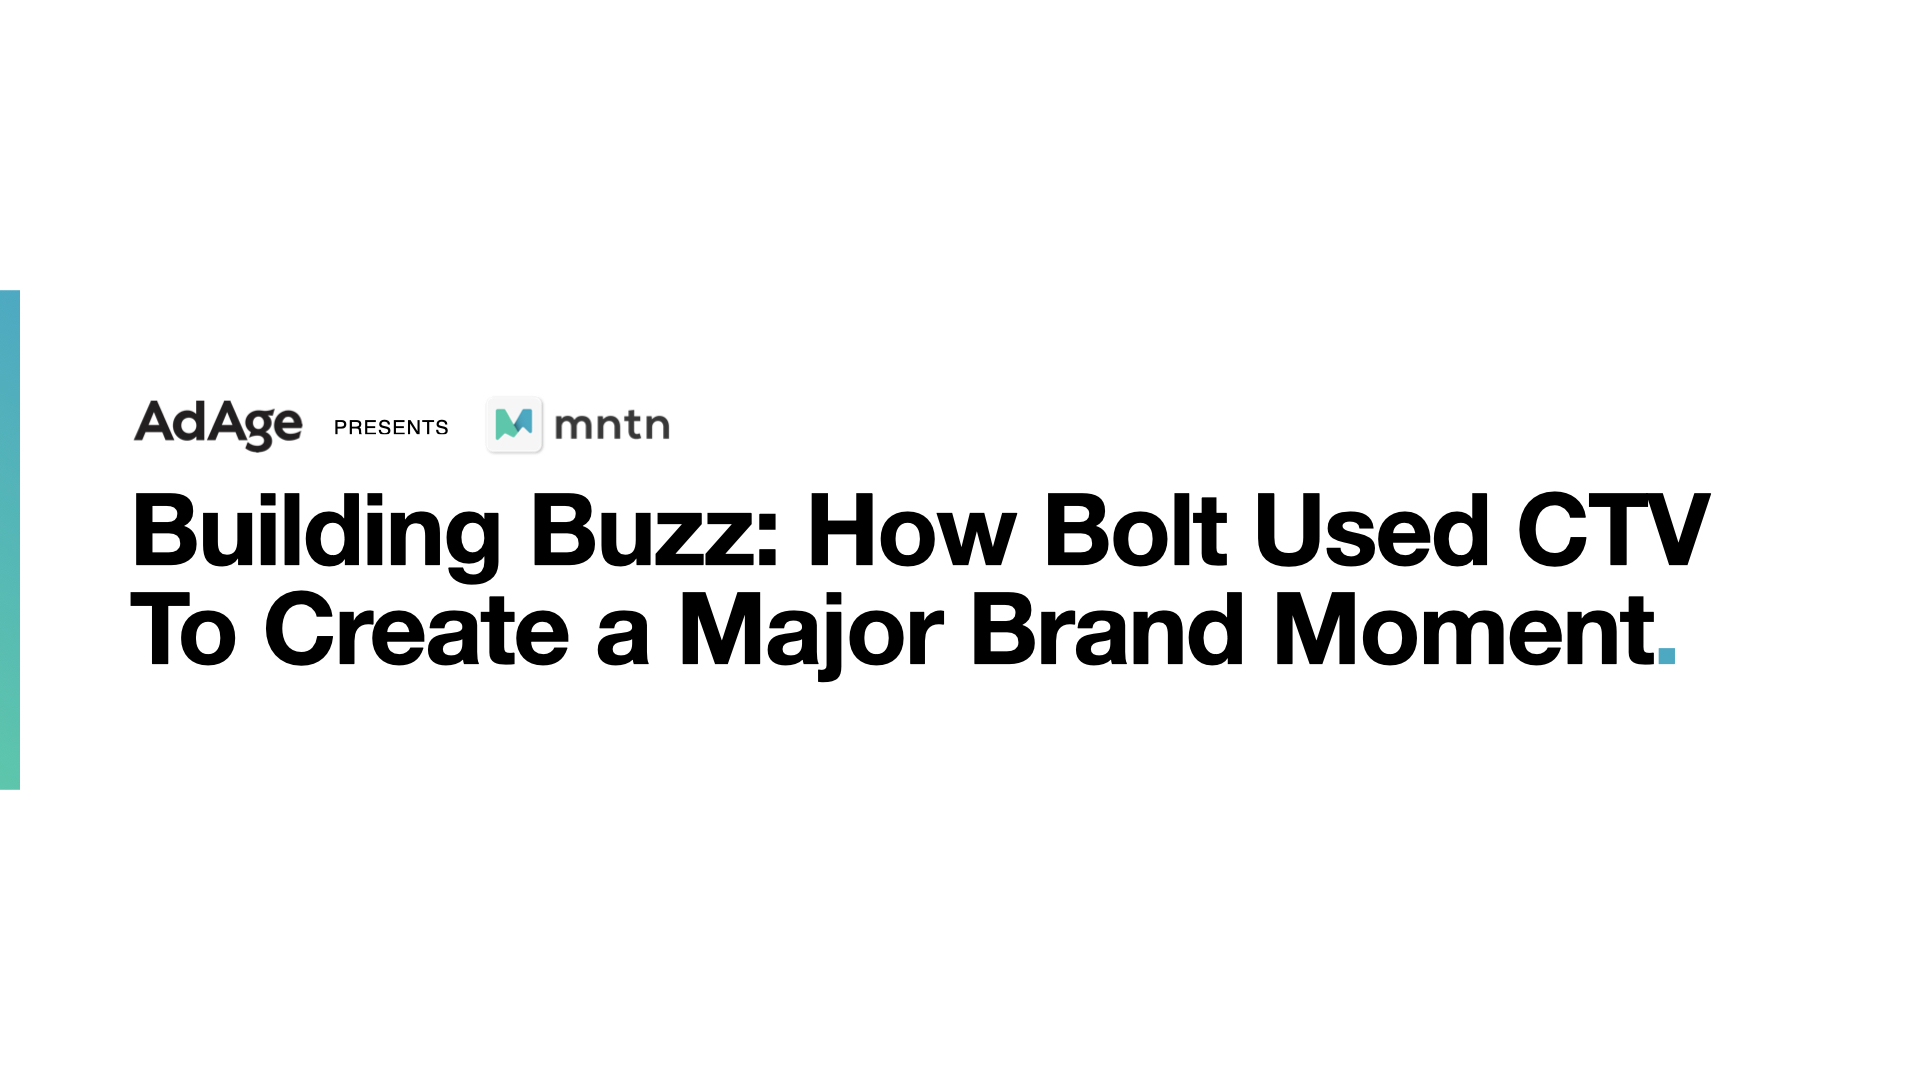 Building Buzz: How Bolt Used CTV to Create a Major Brand Moment